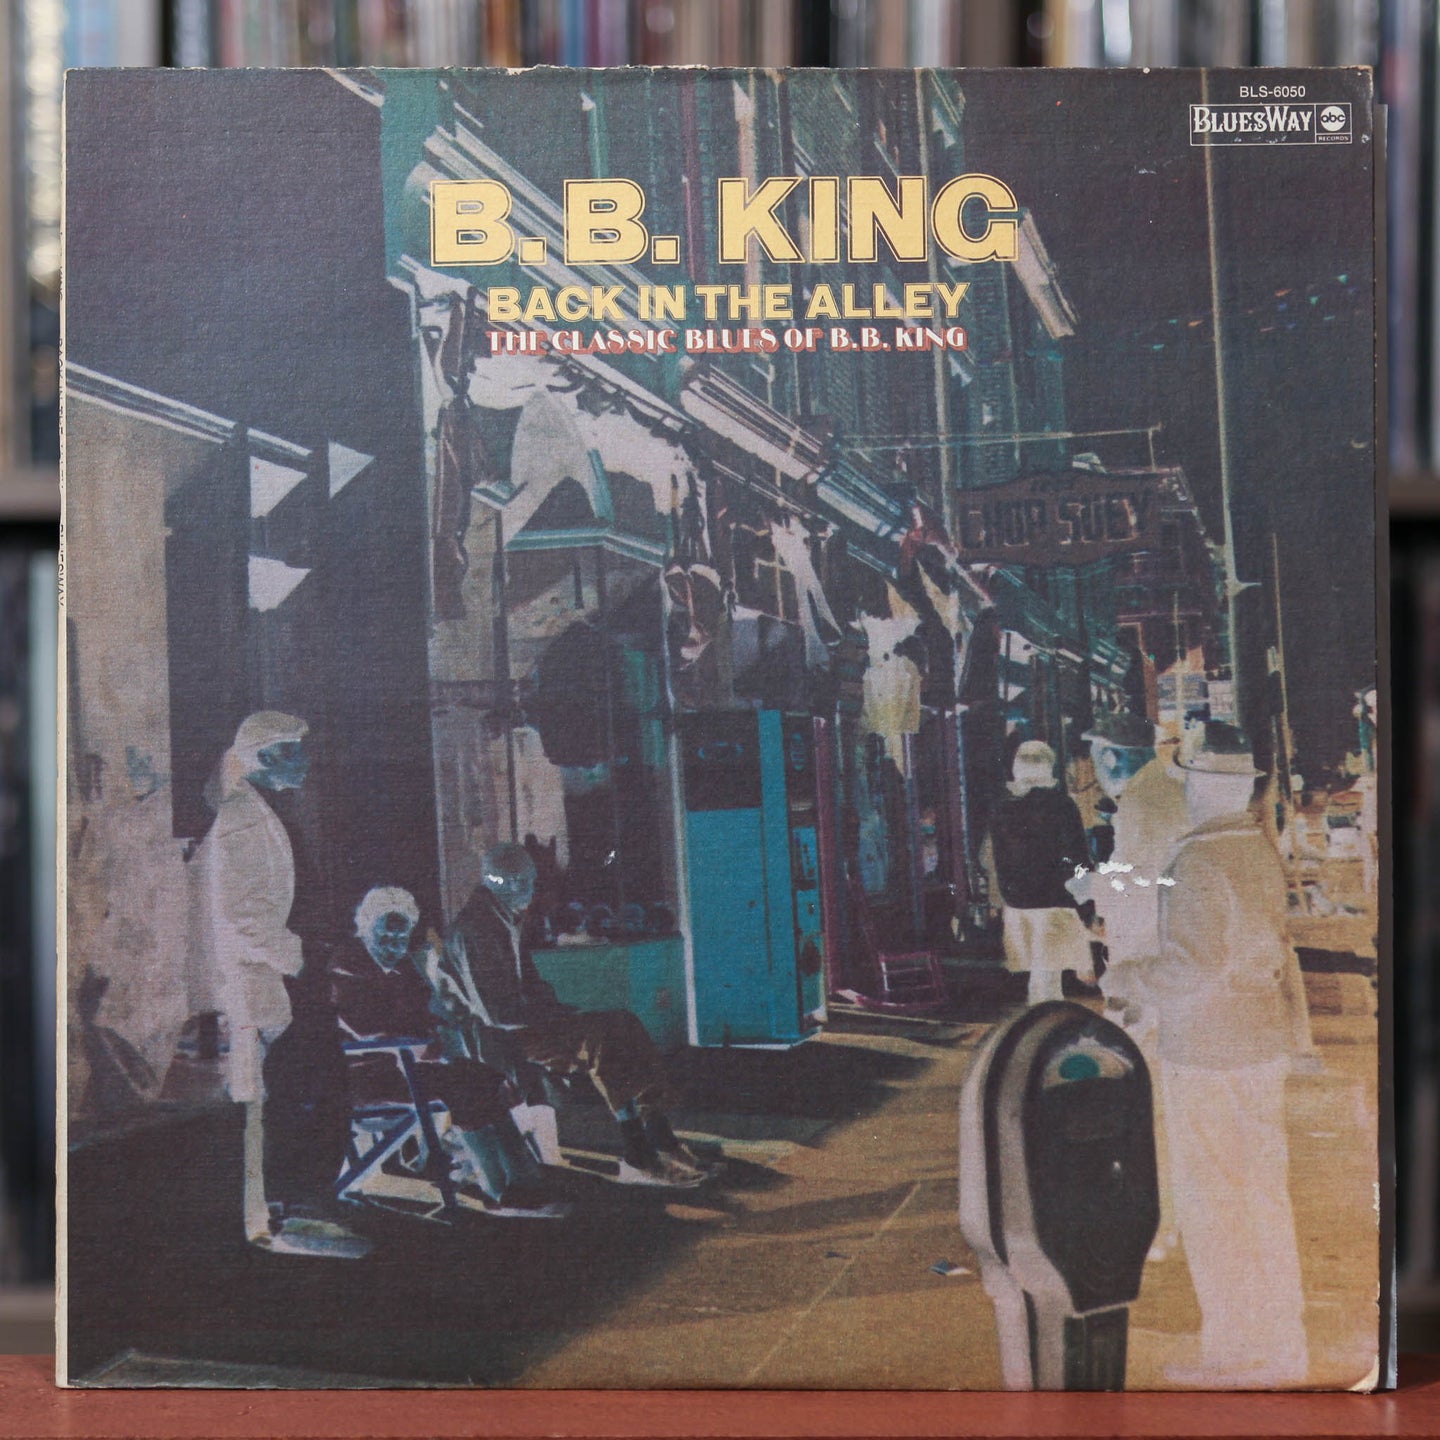 B.B. King - Back In The Alley (The Classic Blues Of B.B. King - 1973 BluesWay, VG+/VG+